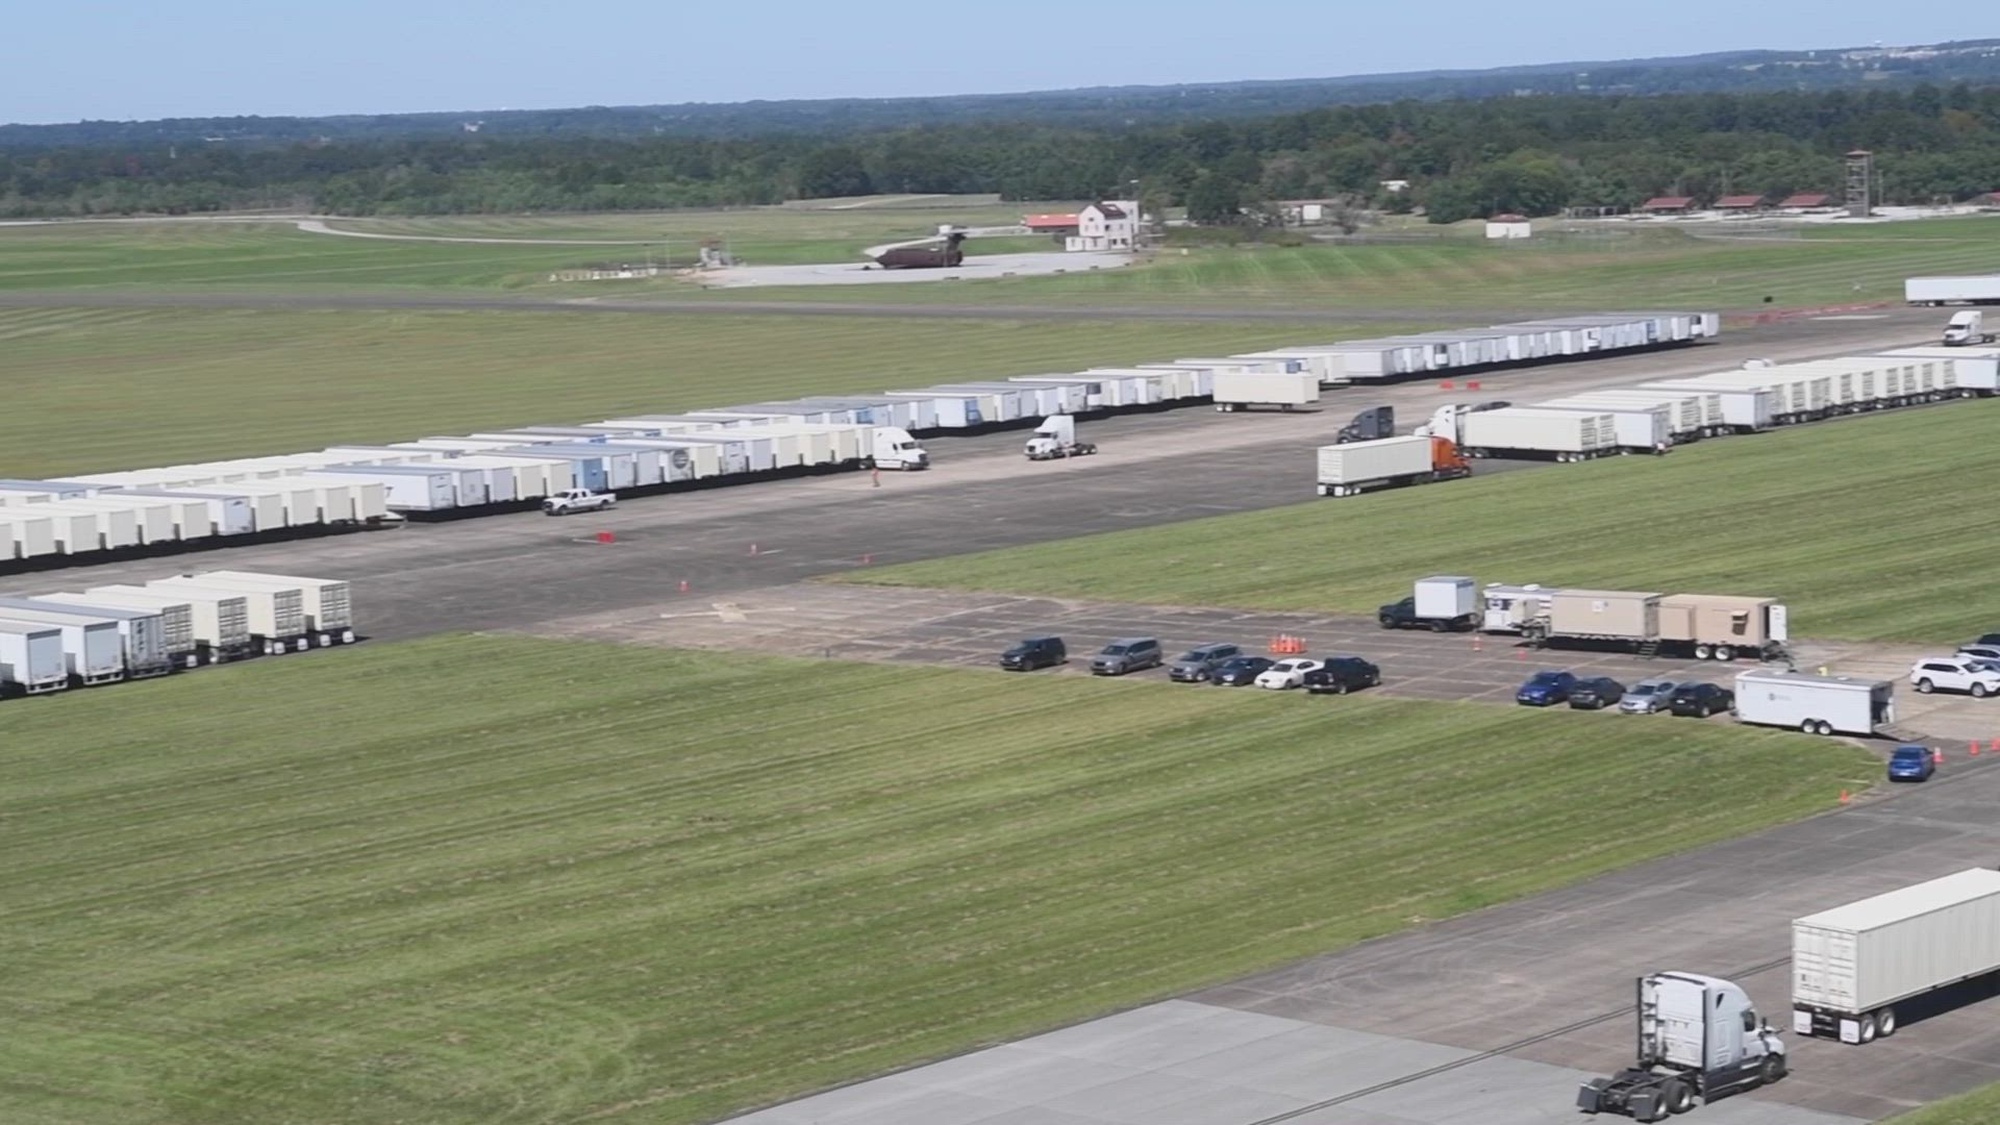 Equipment and supplies for the Federal Emergency Management Agency and the Defense Logistics Agency continue to arrive at Maxwell Air Force Base, Alabama, Sept. 27, 2022. The installation is an established Incident Support Base and is used to pre-position equipment and personnel to rapidly deploy to areas that may be affected by Hurricane Ian.